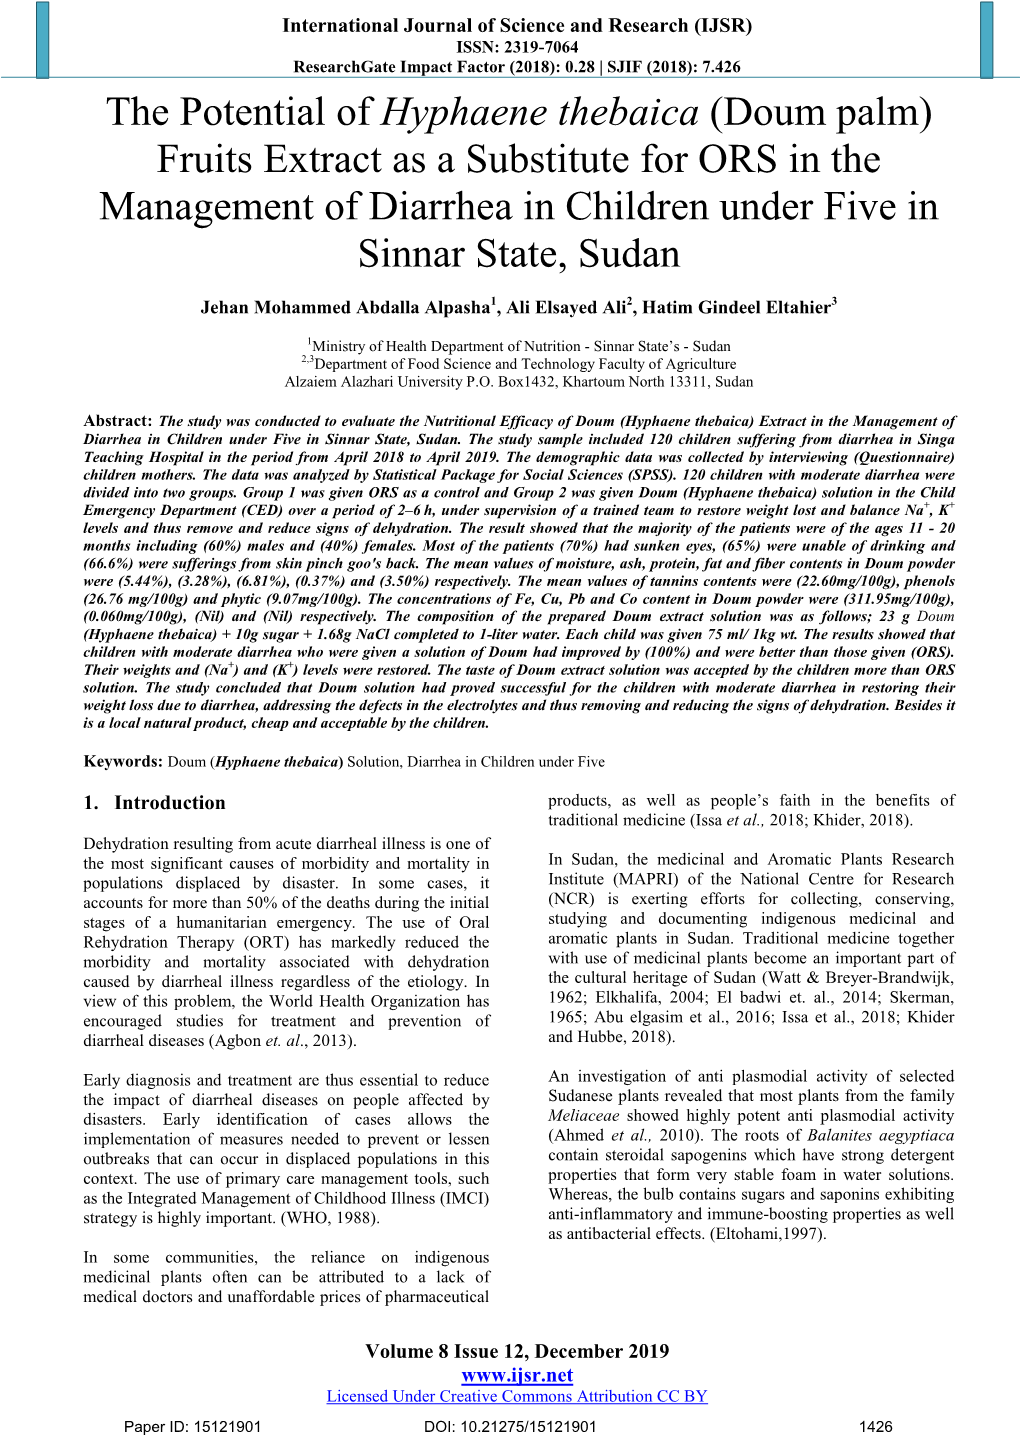 Hyphaene Thebaica (Doum Palm) Fruits Extract As a Substitute for ORS in the Management of Diarrhea in Children Under Five in Sinnar State, Sudan